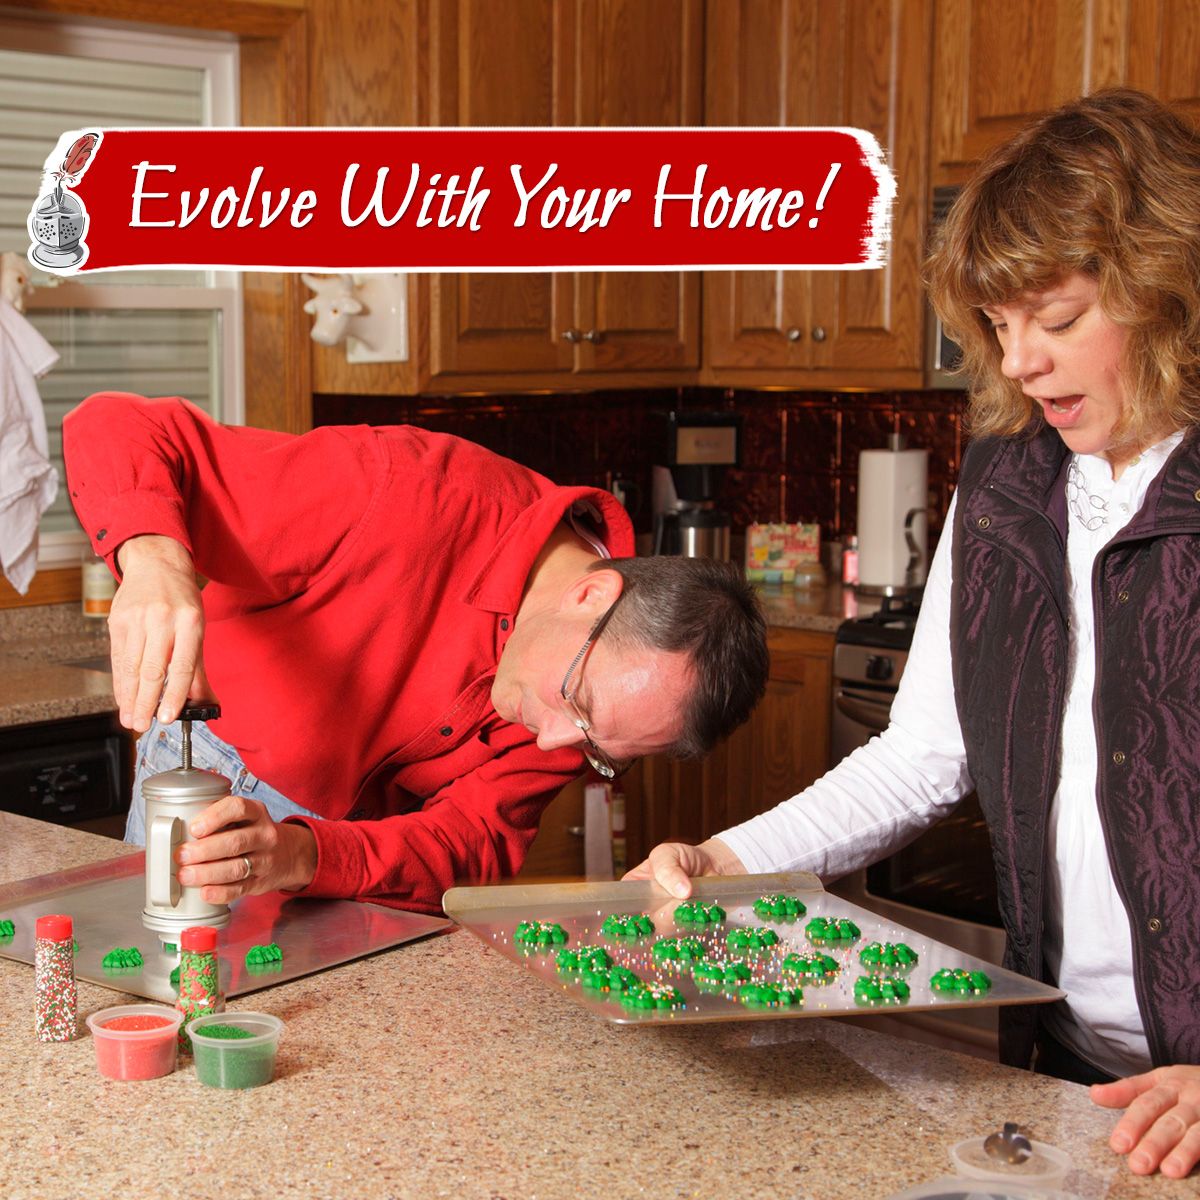 Evolve with Your Home!